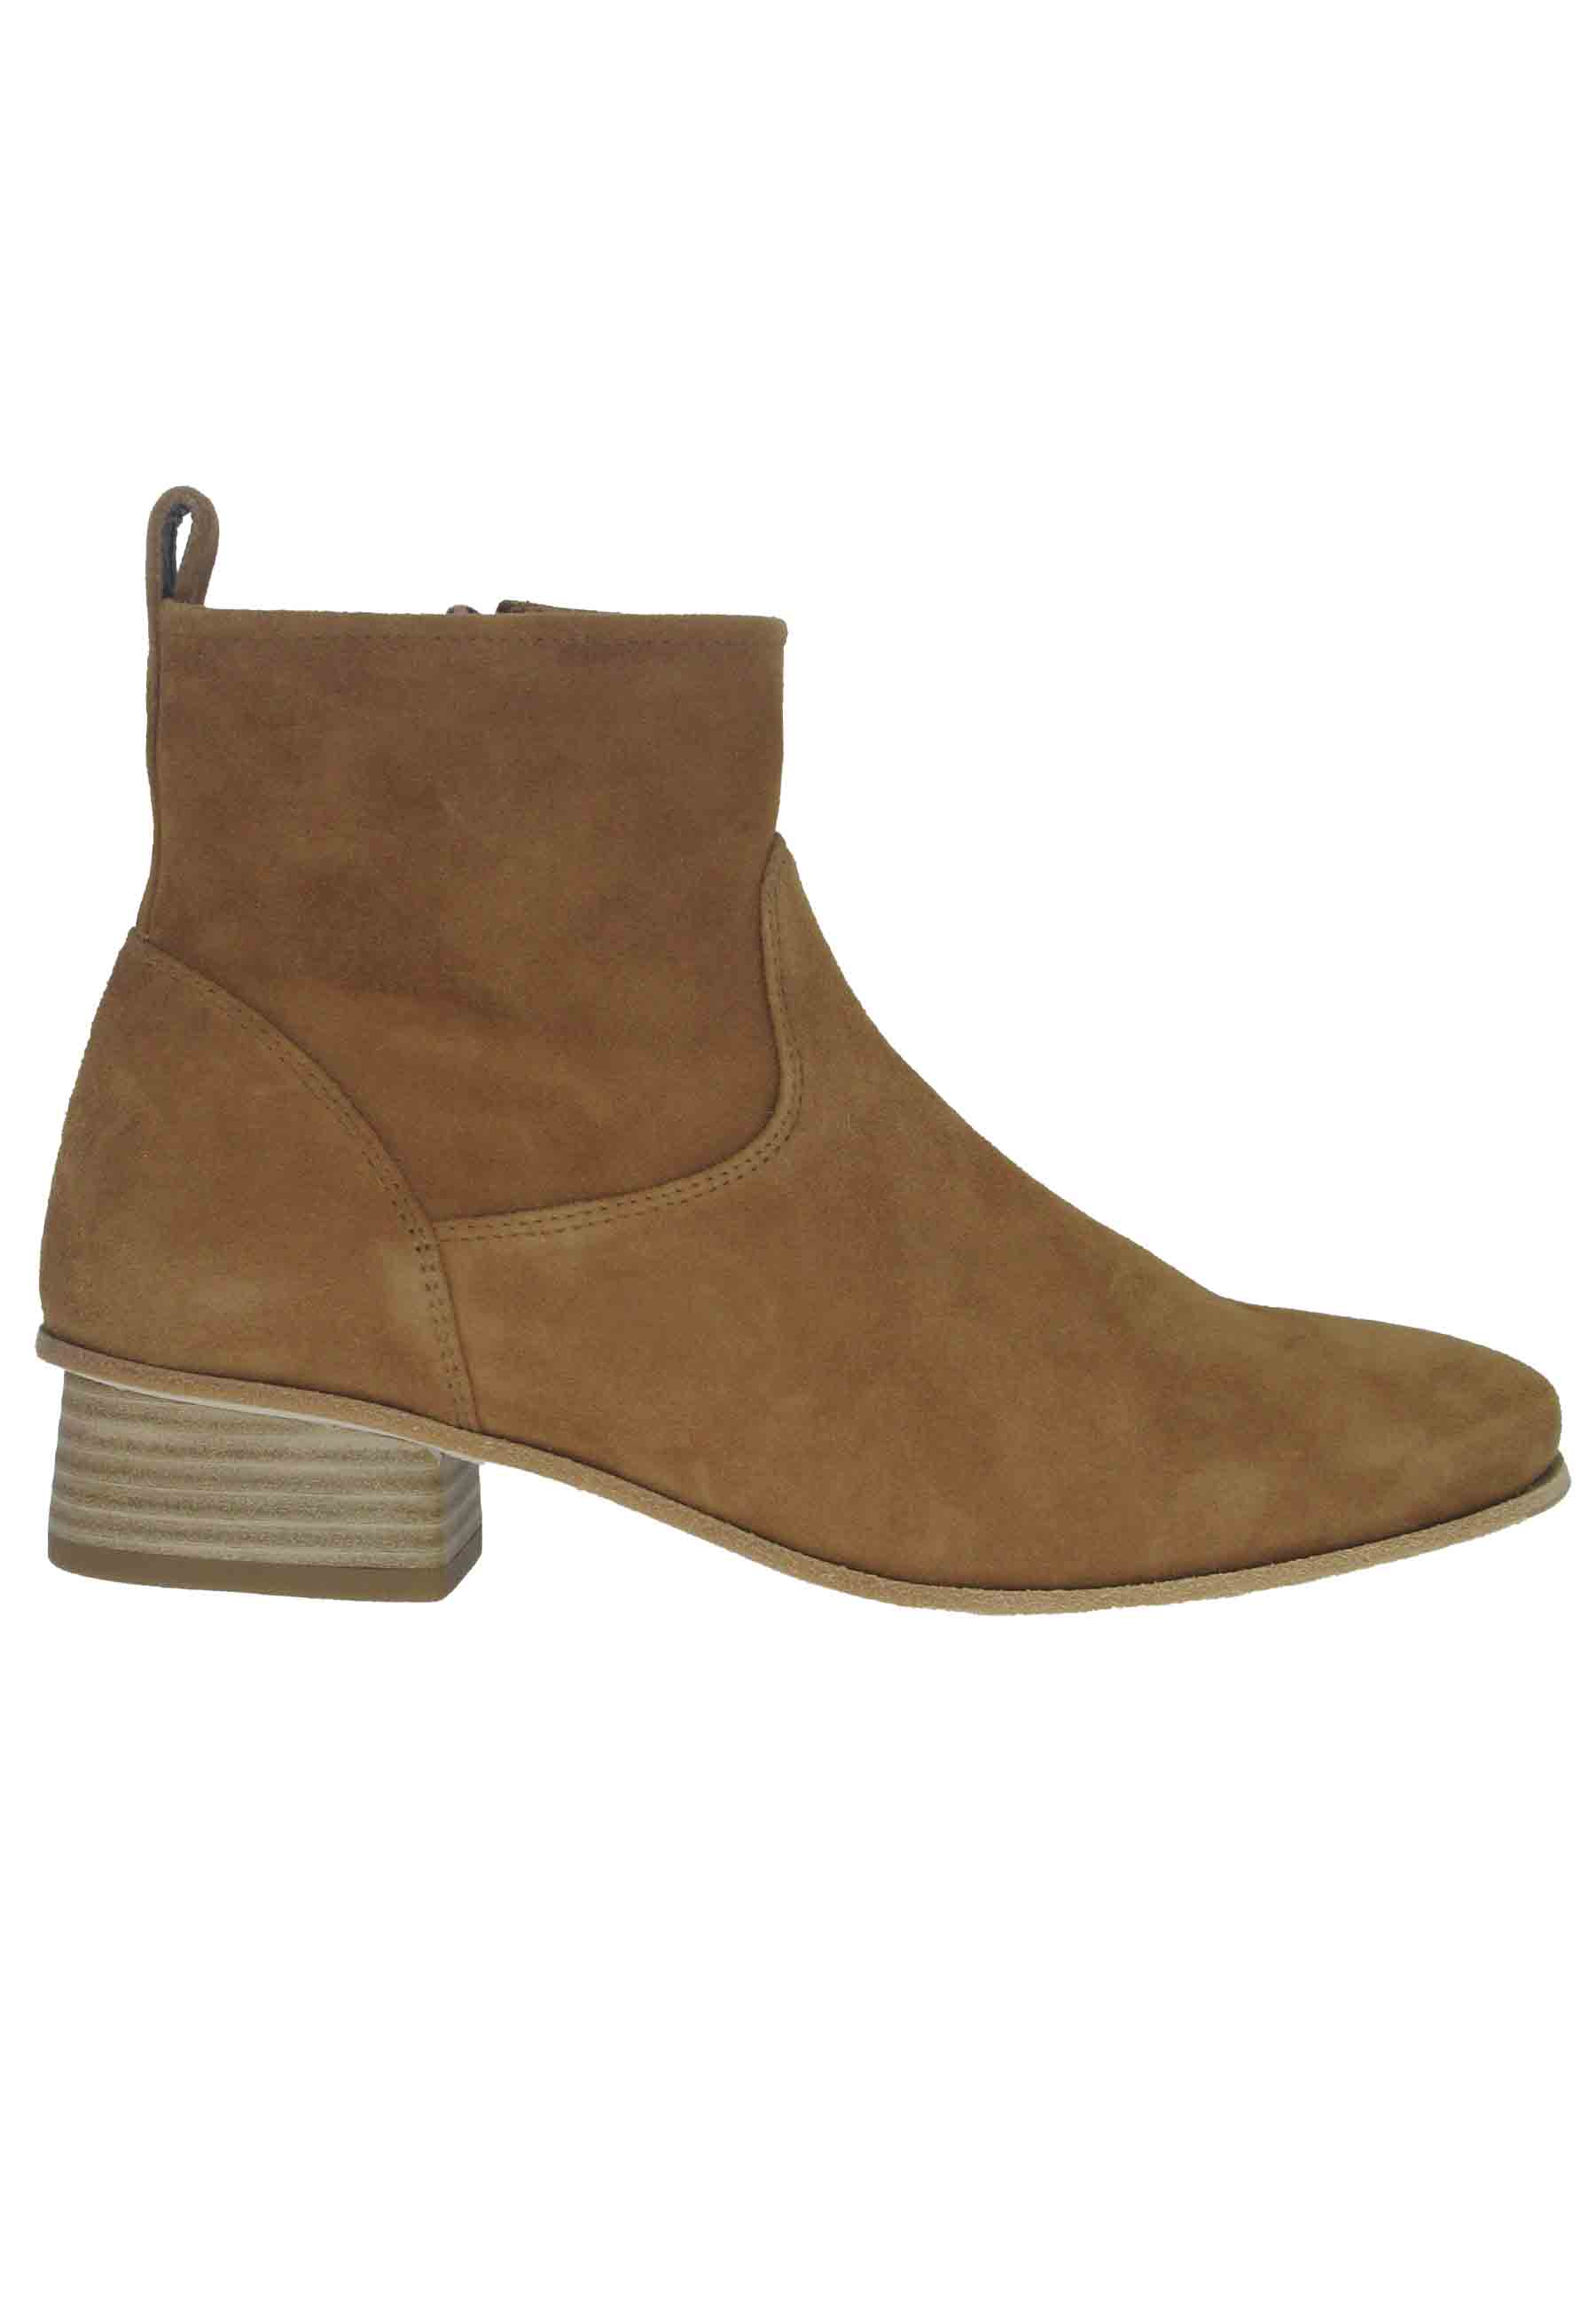 Esay women's ankle boots in leather suede with low heel